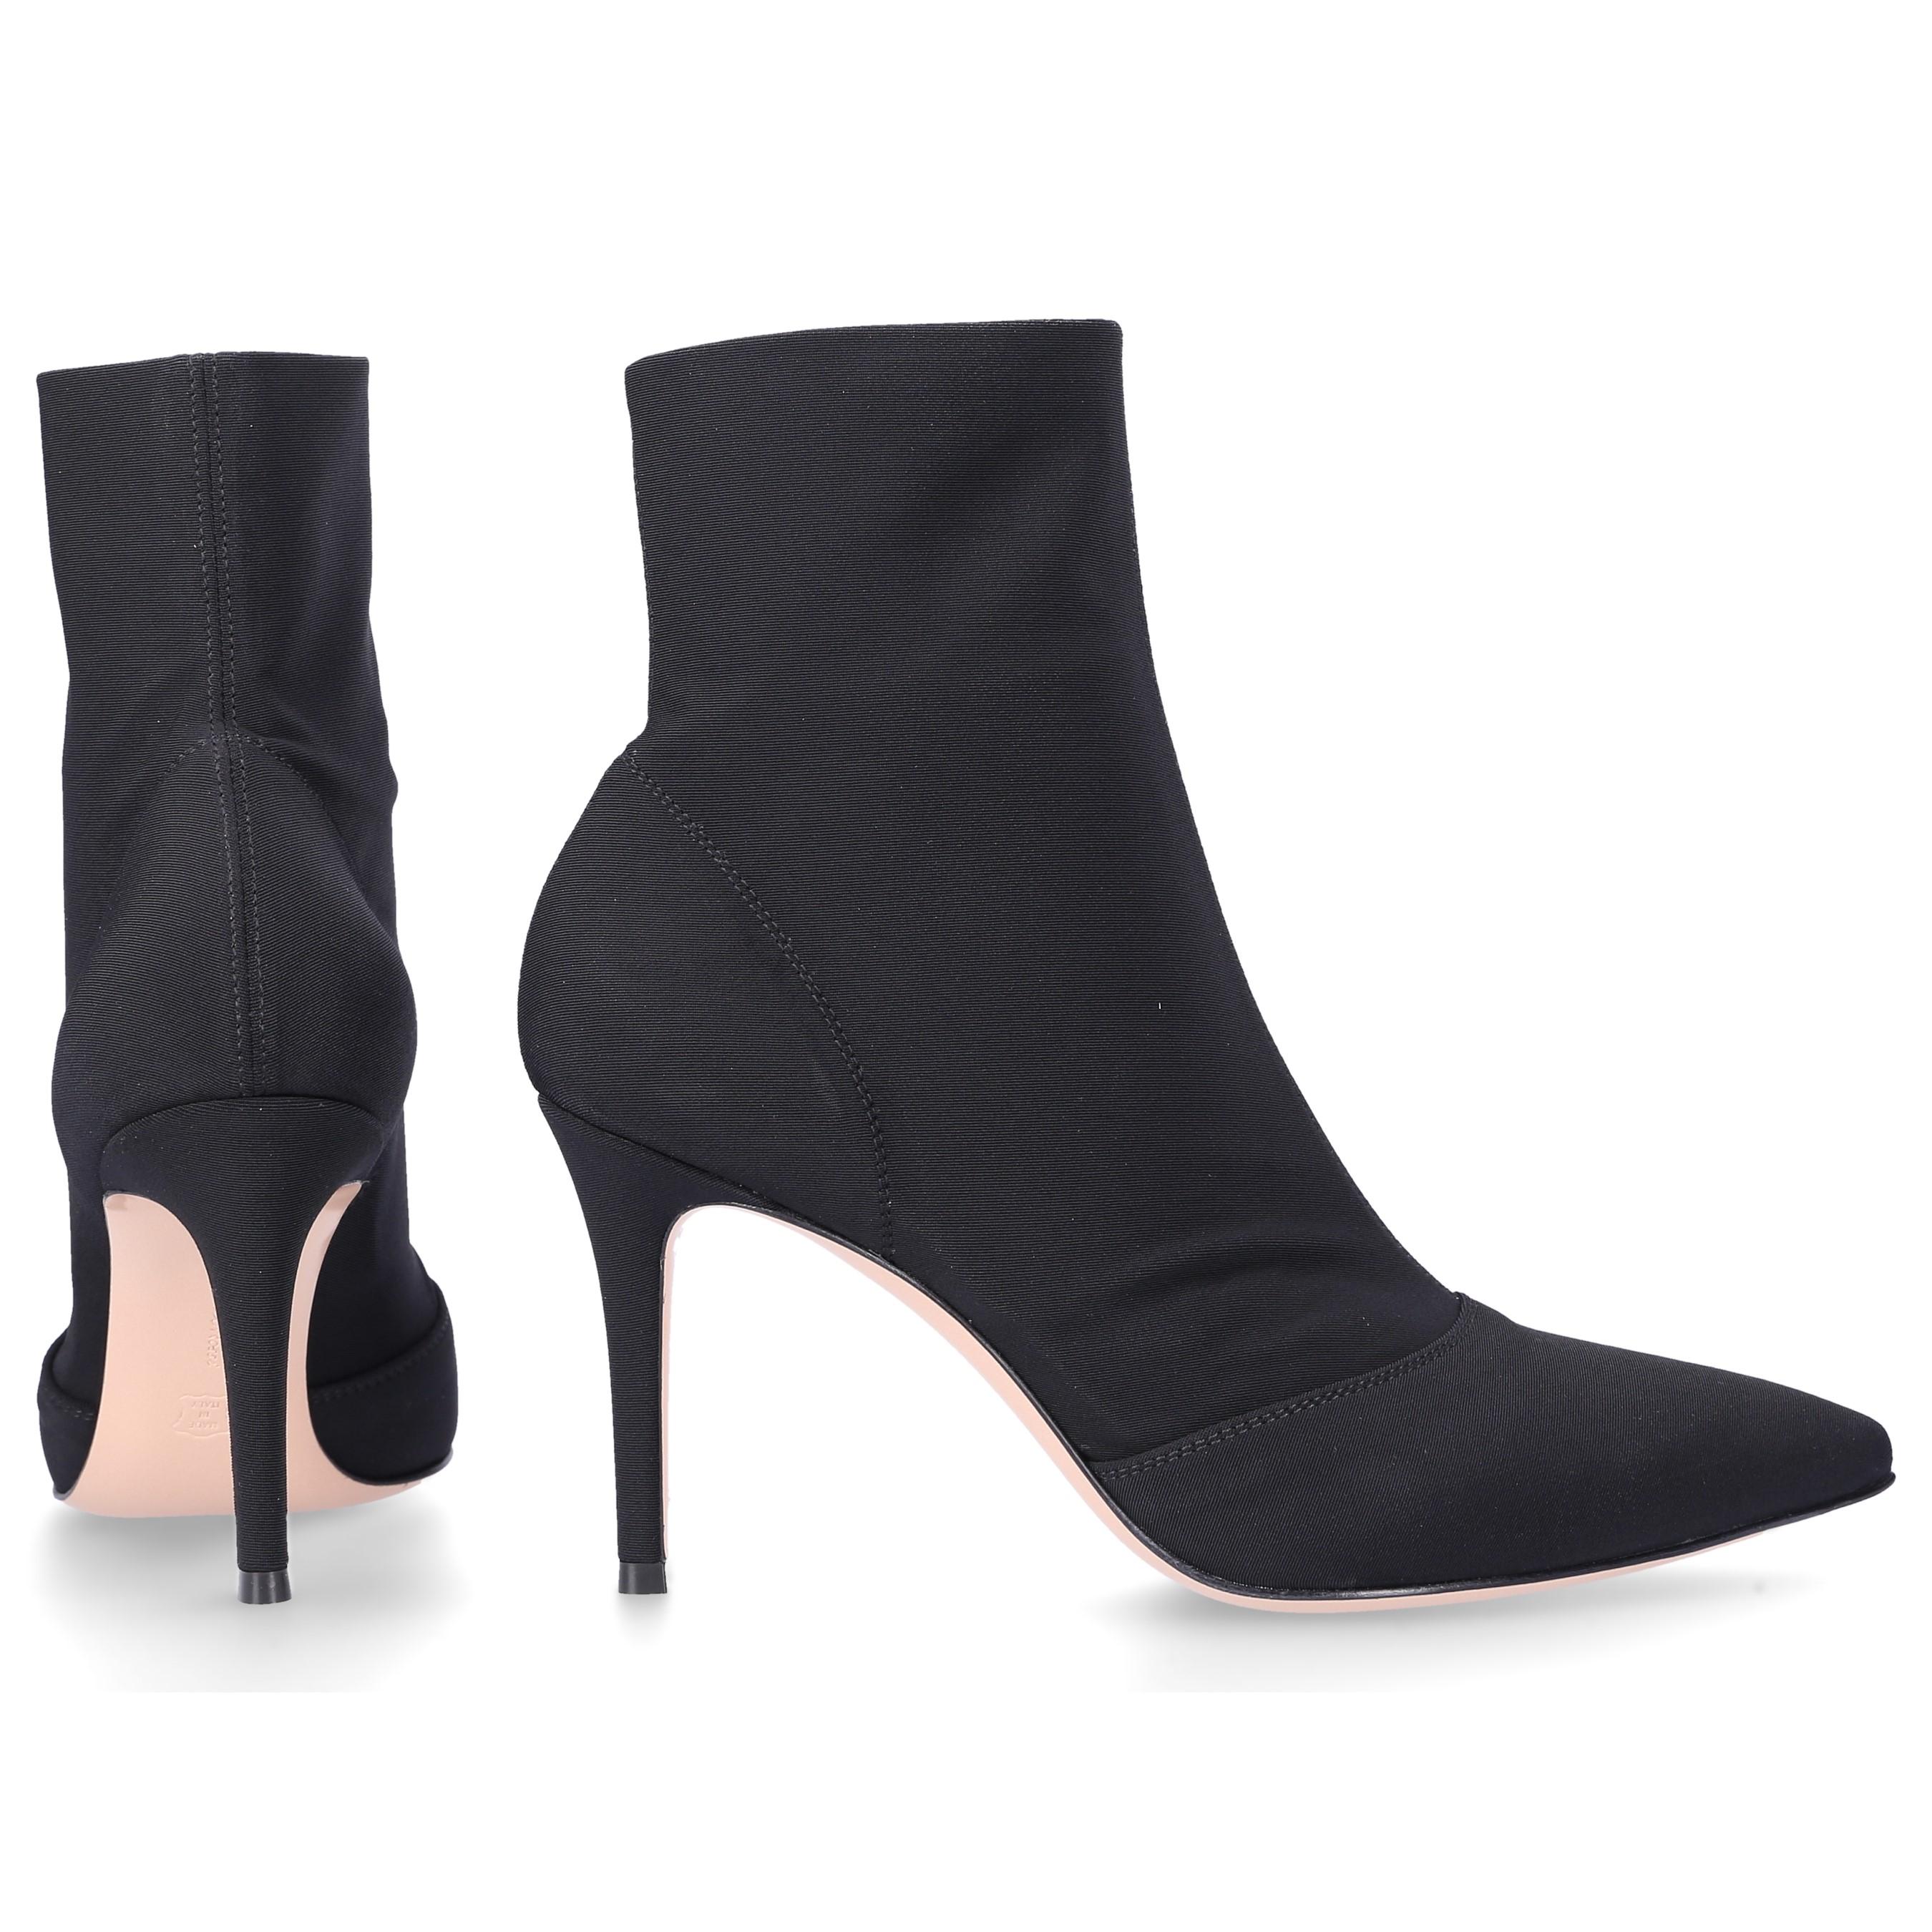 Gianvito Rossi Ankle Boots Black Elite 85 - Lyst